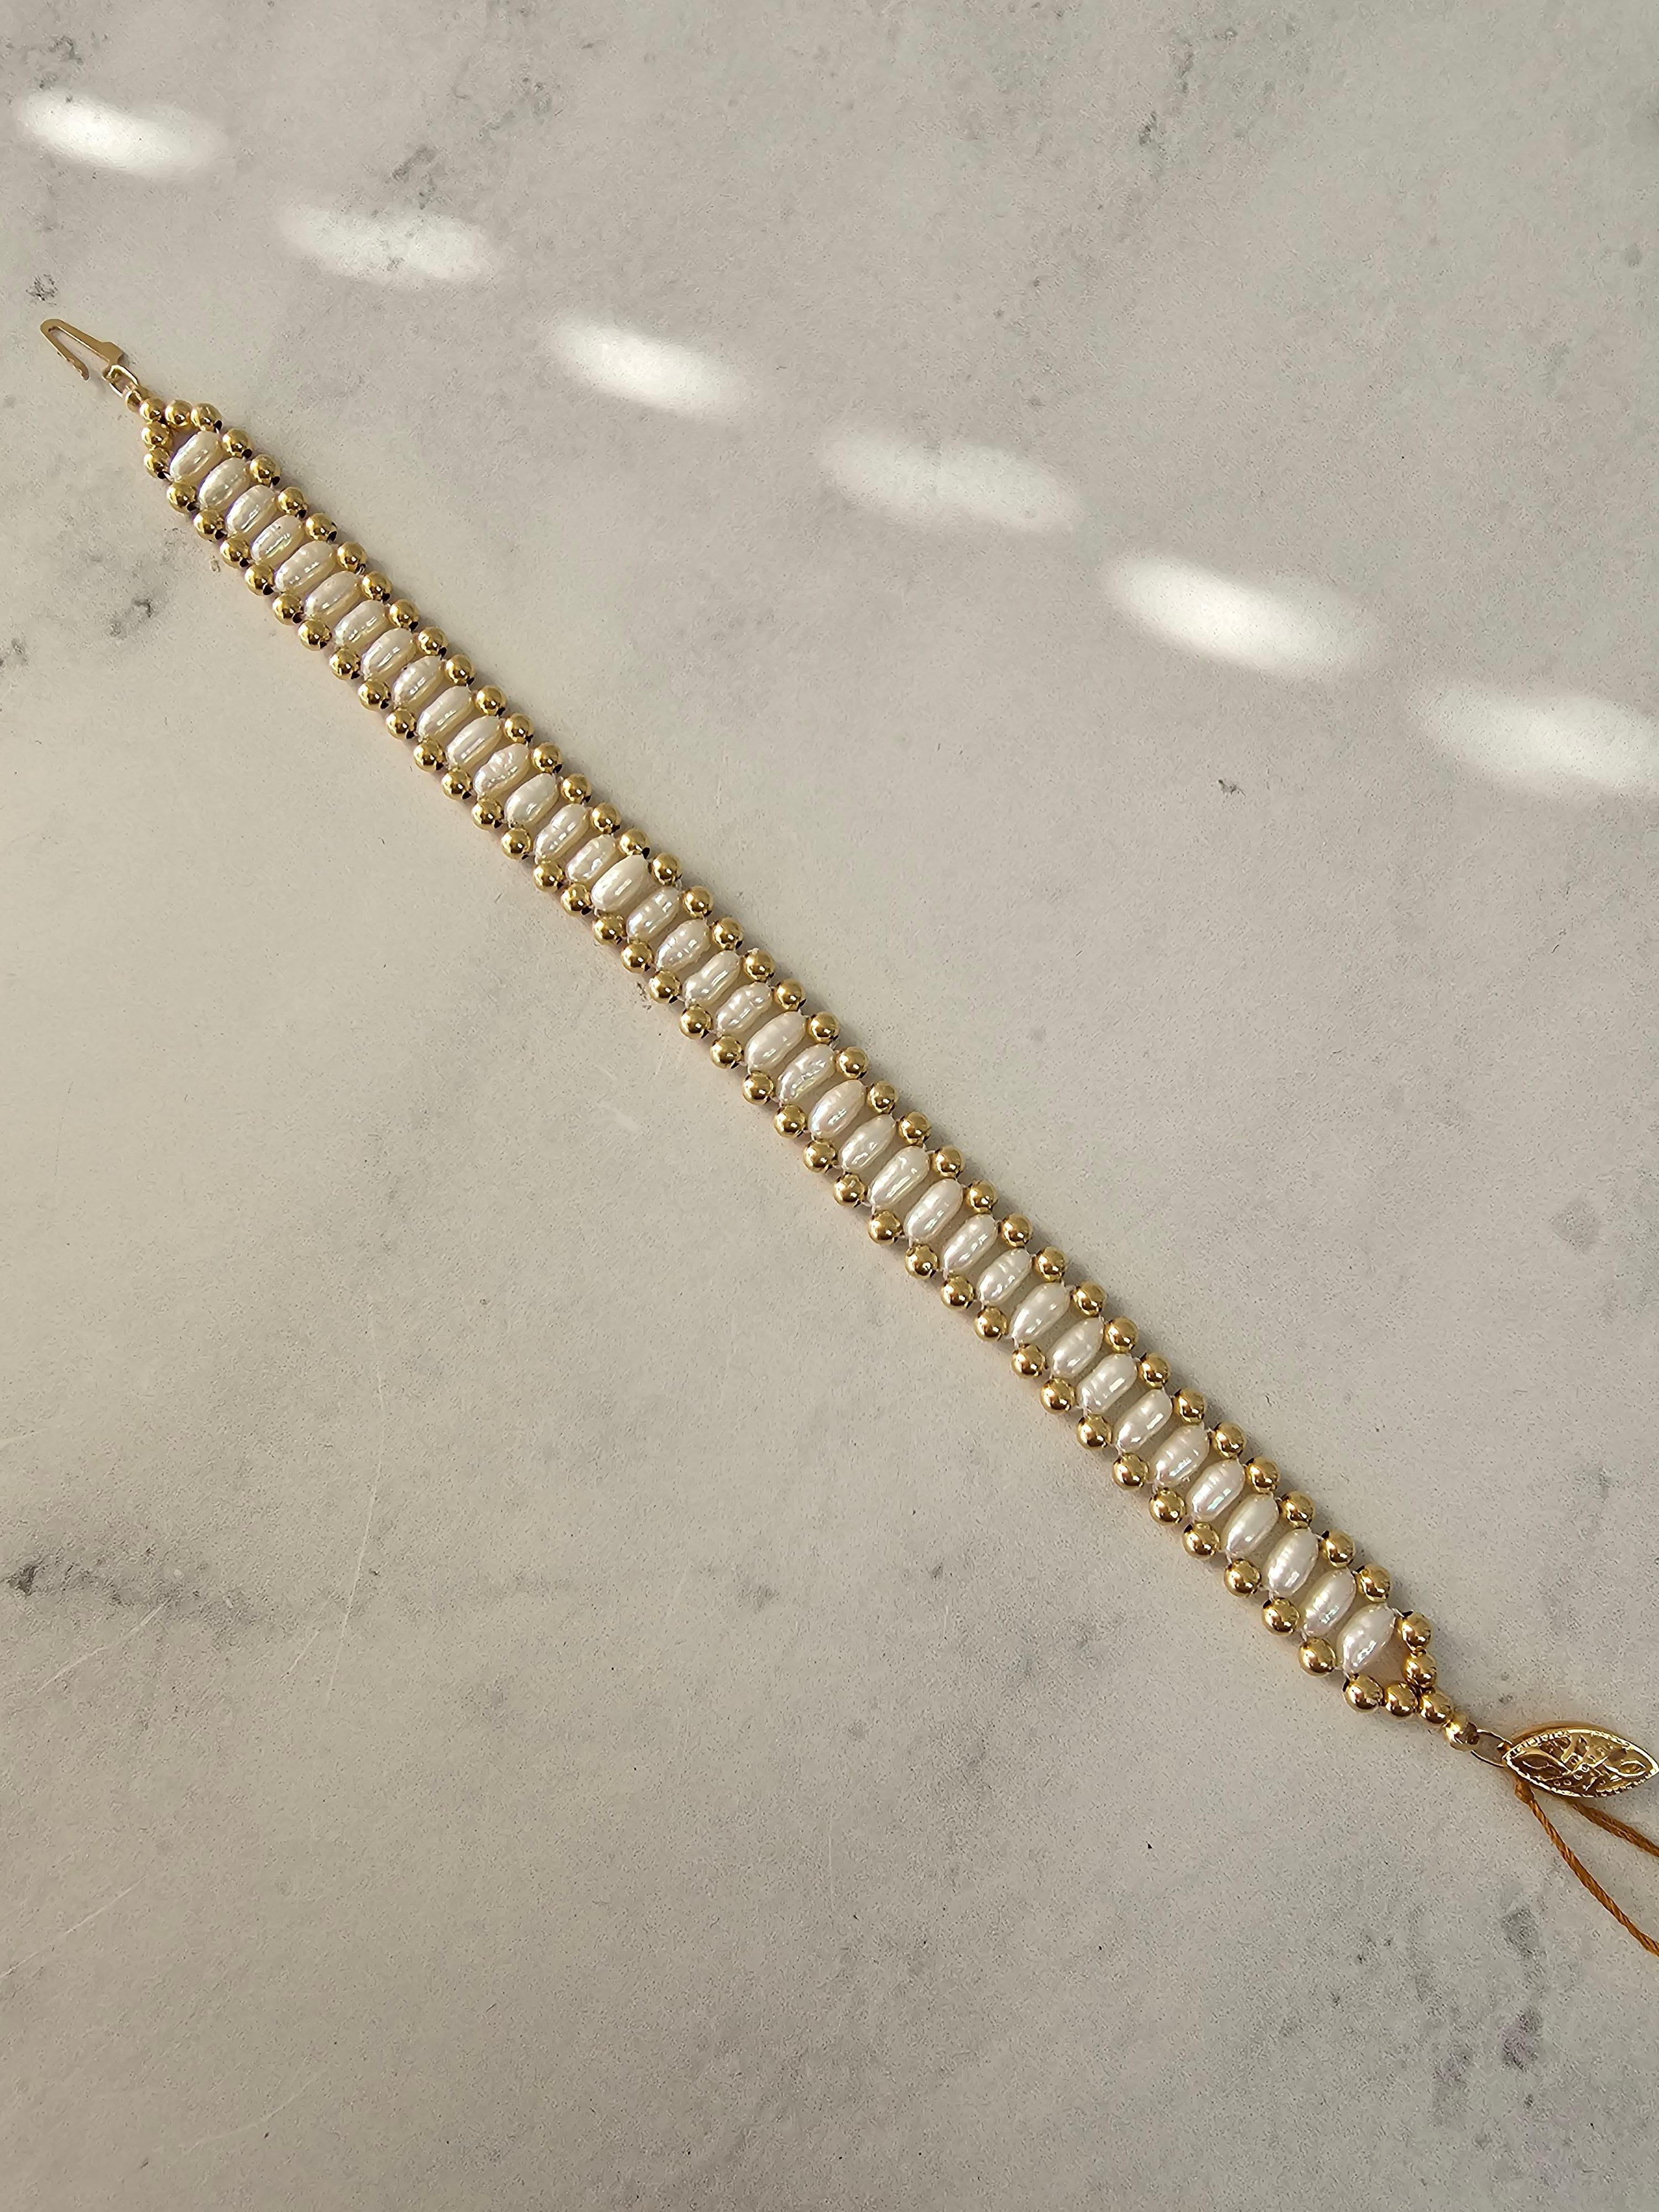 Vintage Rice Pearl Bracelet 14k Yellow Gold In New Condition For Sale In Sugar Land, TX